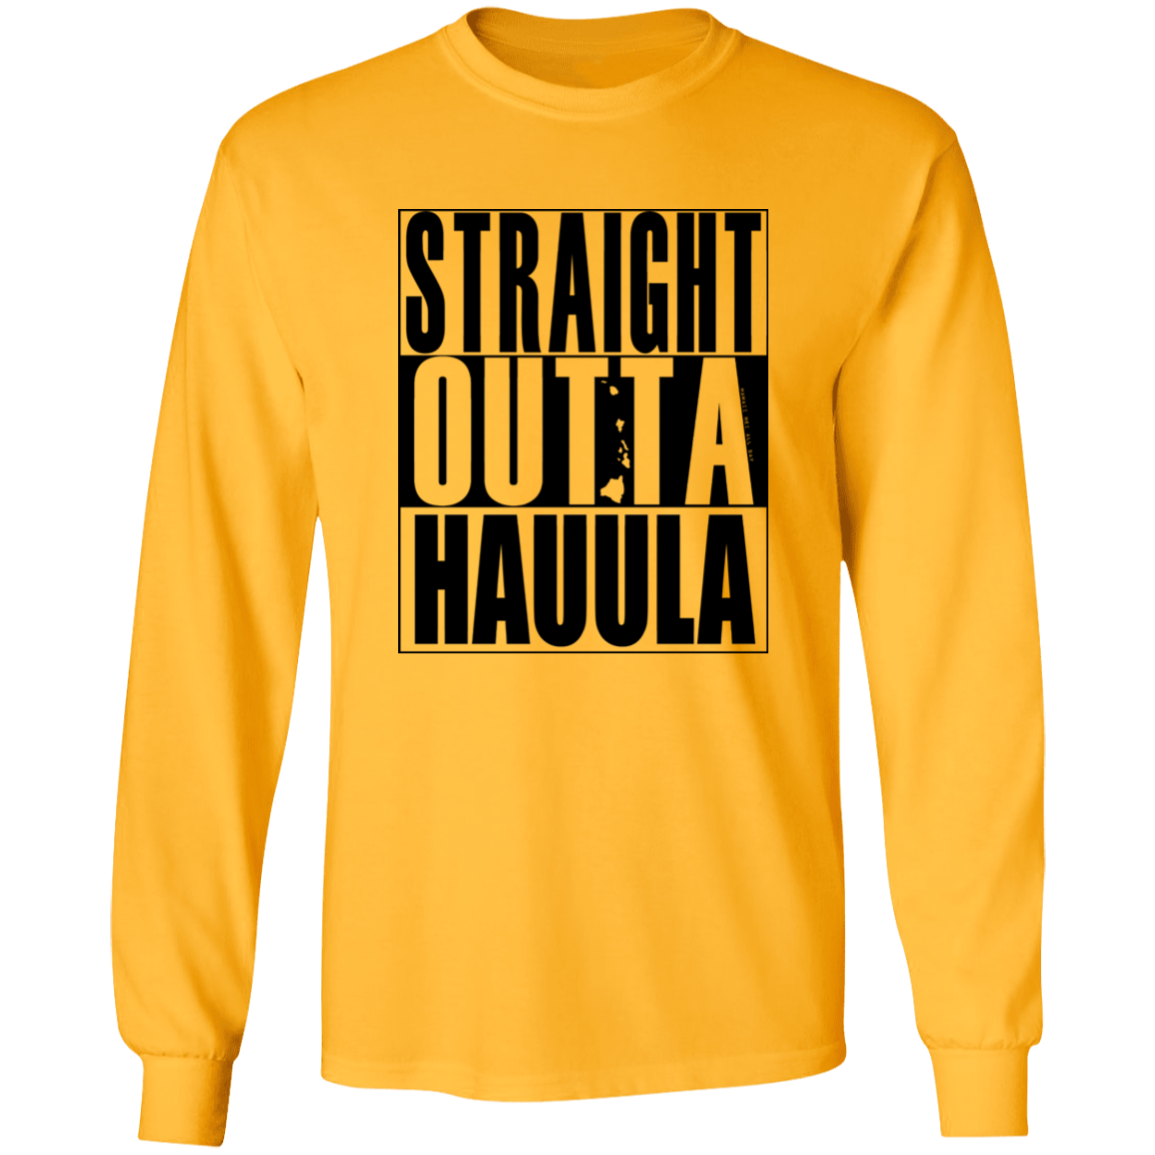 Straight Outta Hauula (black ink) LS T-Shirt